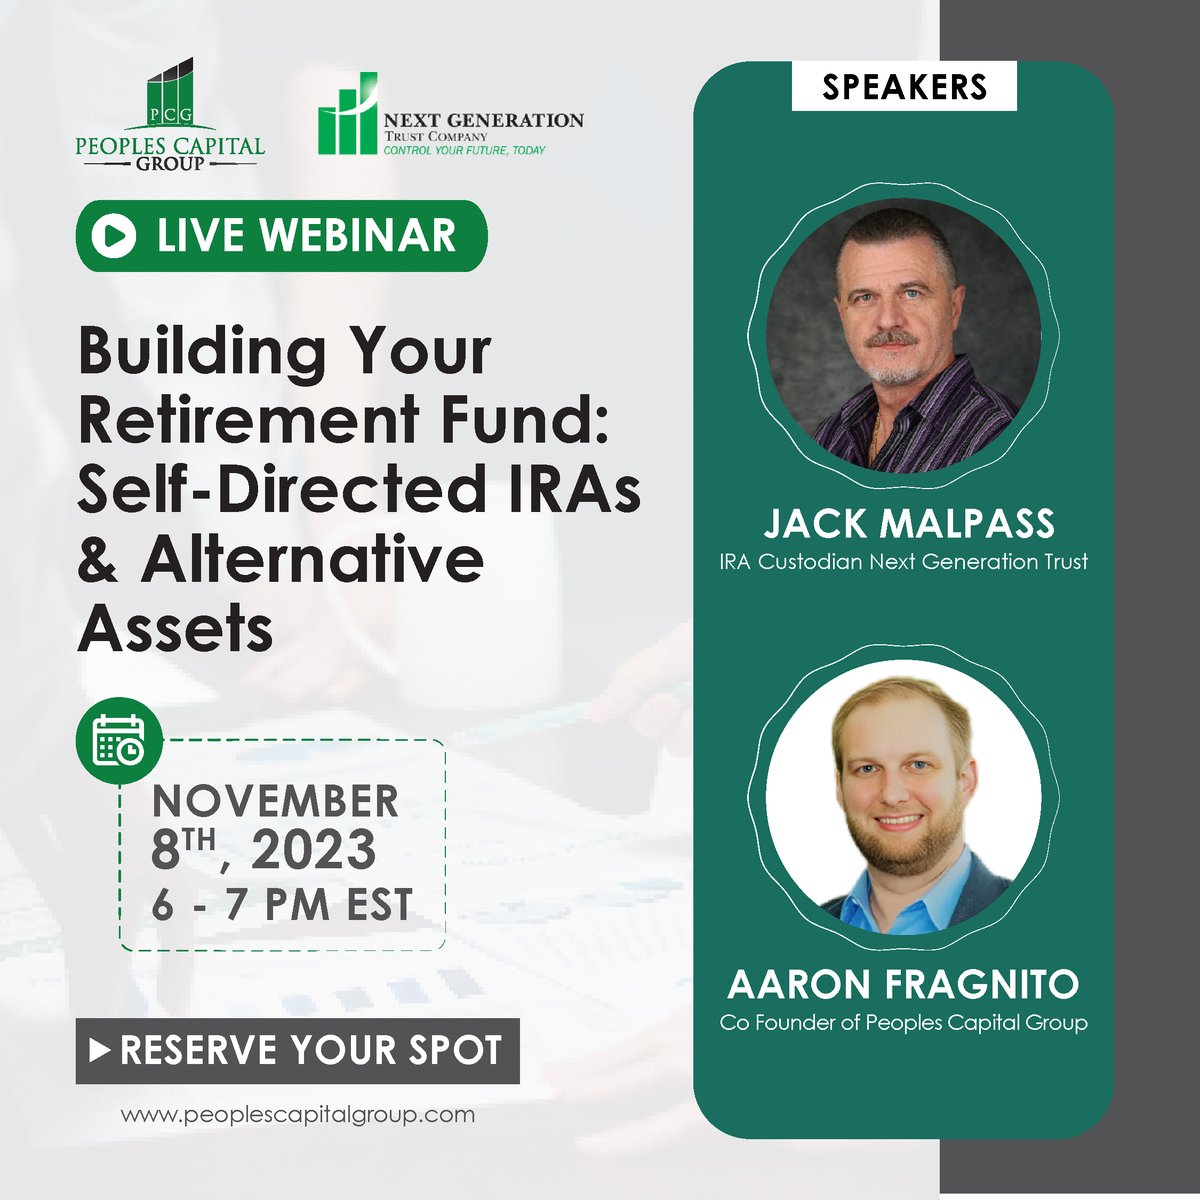 Reserve Your Spot: us06web.zoom.us/webinar/regist…

Join our insightful webinar on November 8th, 2023, 6-7 PM EST.

Learn about tax strategies for retirement investment planning and open doors to networking opportunities.

#investmentwebinar #alternativeinvestment  #peoplescapitalgroup